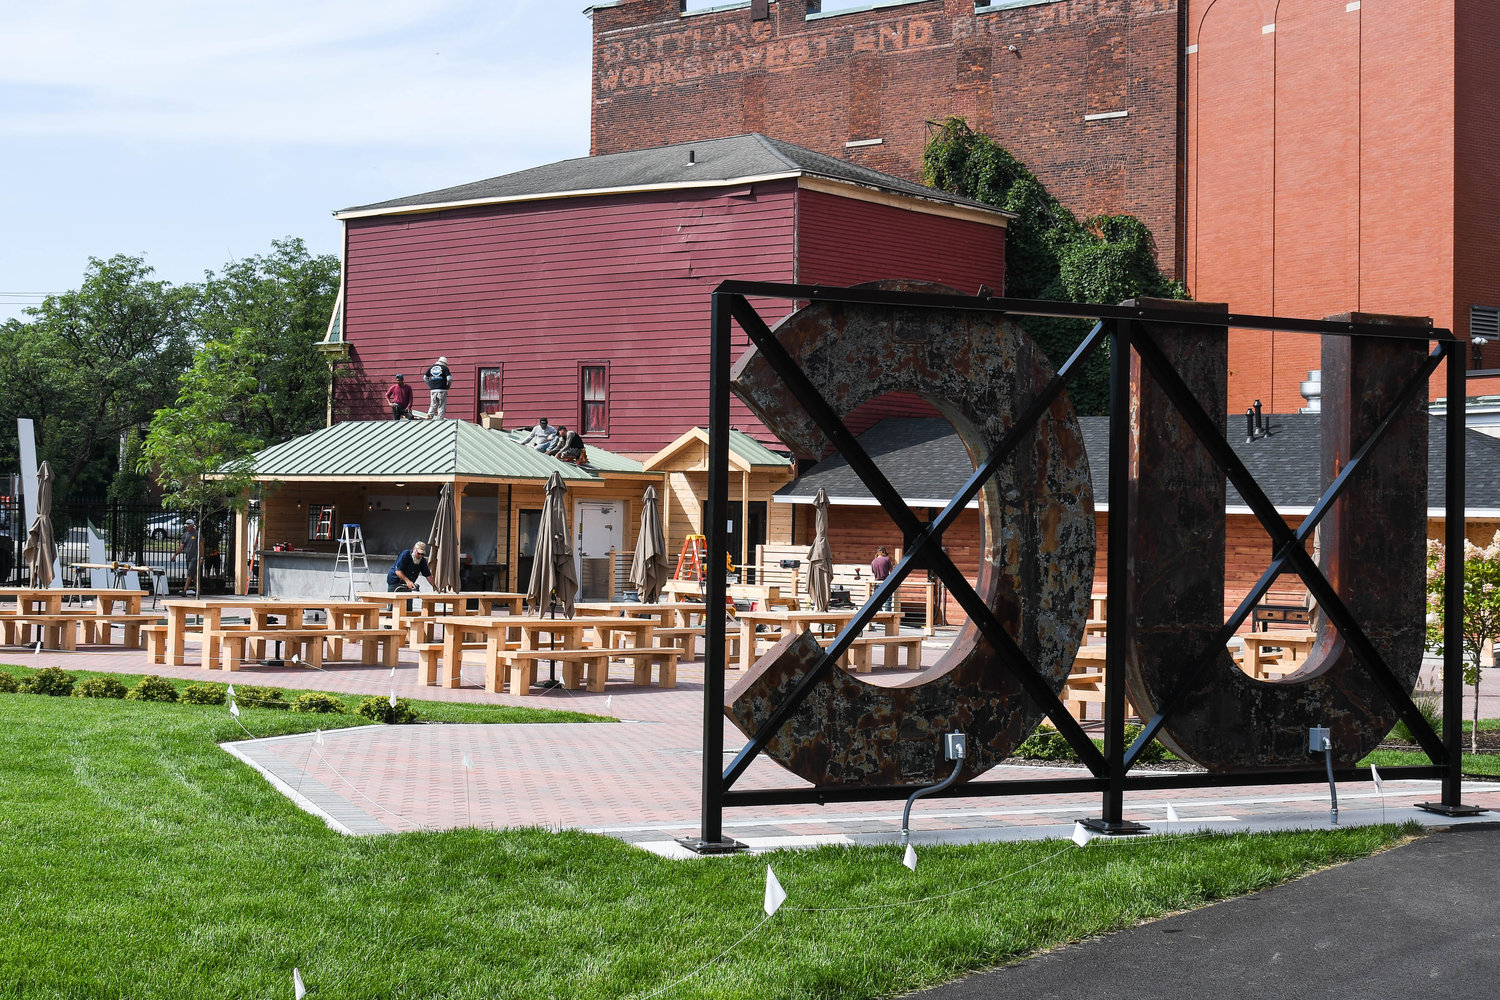 Finishing touches are made at The Biergarten, located at F.X. Matt Brewing Company, 830 Varick St. in Utica. The Biergarten will open to the public on Saturday, Aug. 20 for a soft launch.